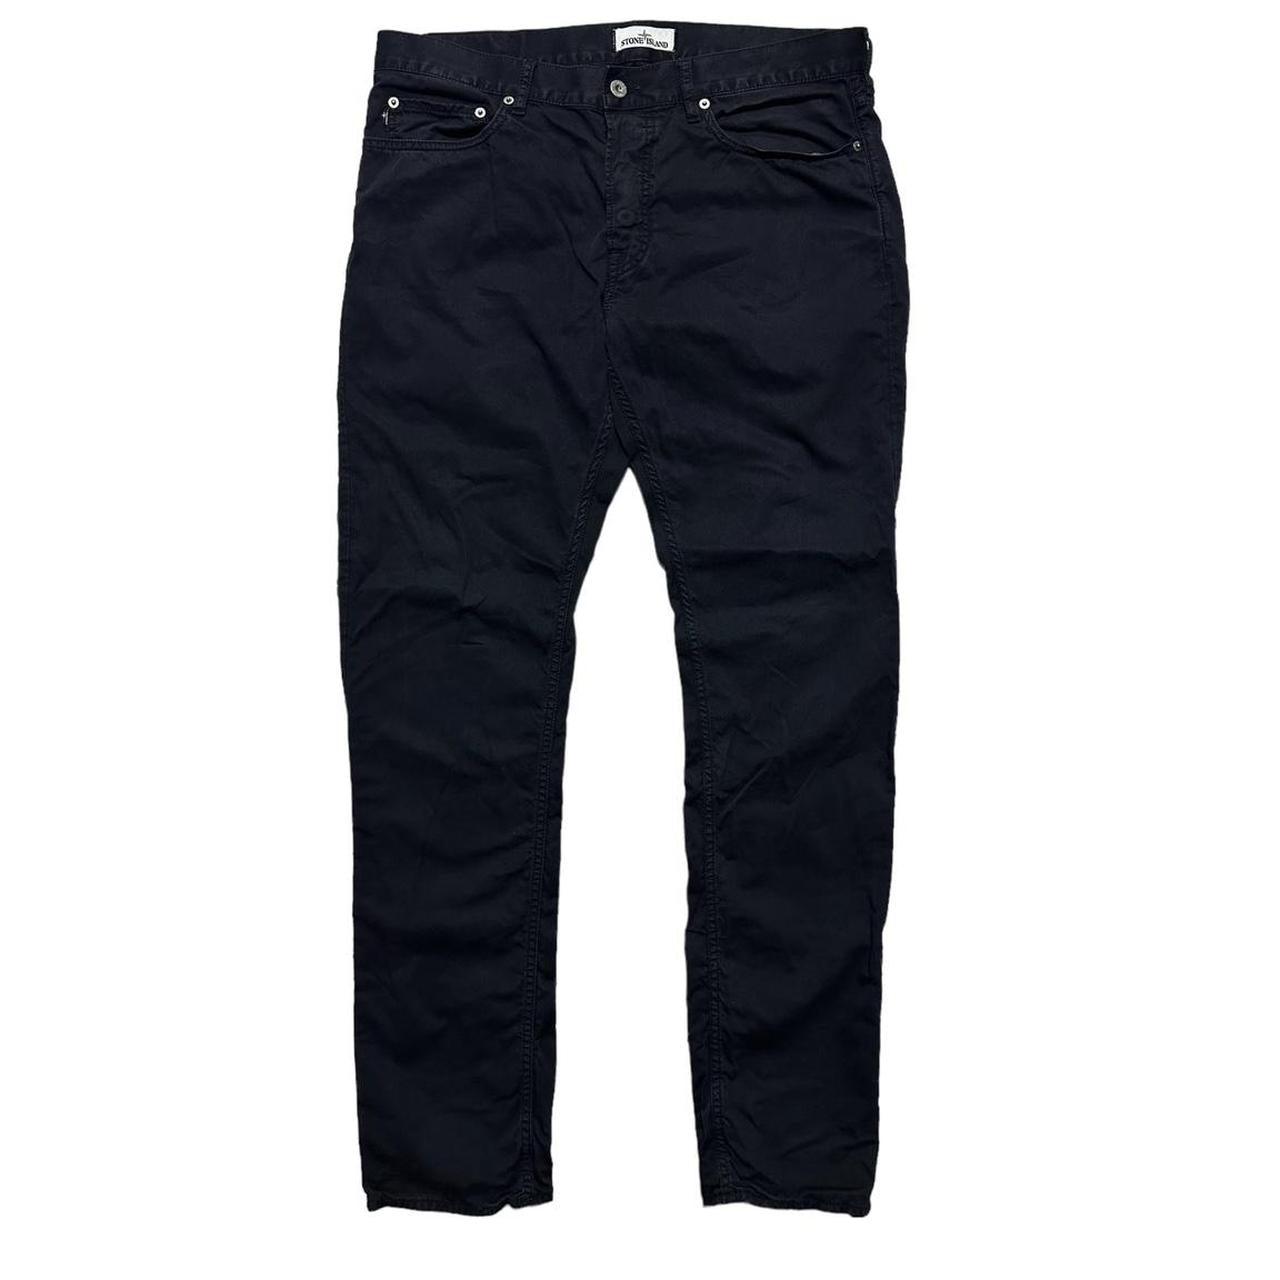 Stone Island Trousers - Known Source